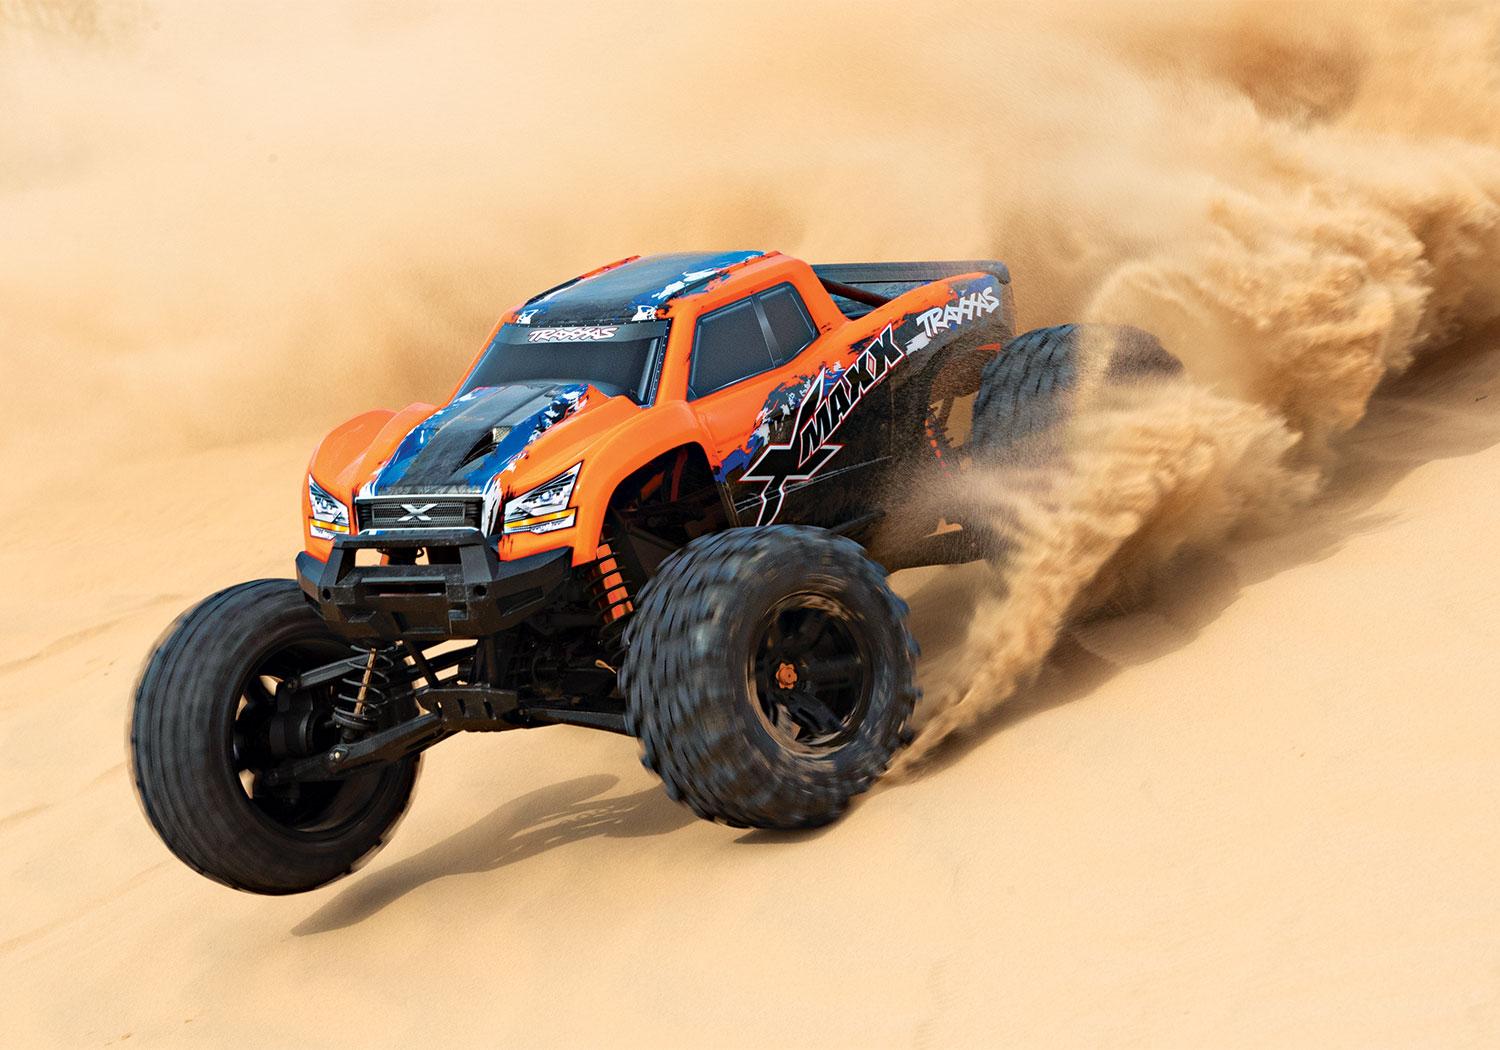 Rc Racing Trucks: Maintaining Your RC Racing Truck for Peak Performance